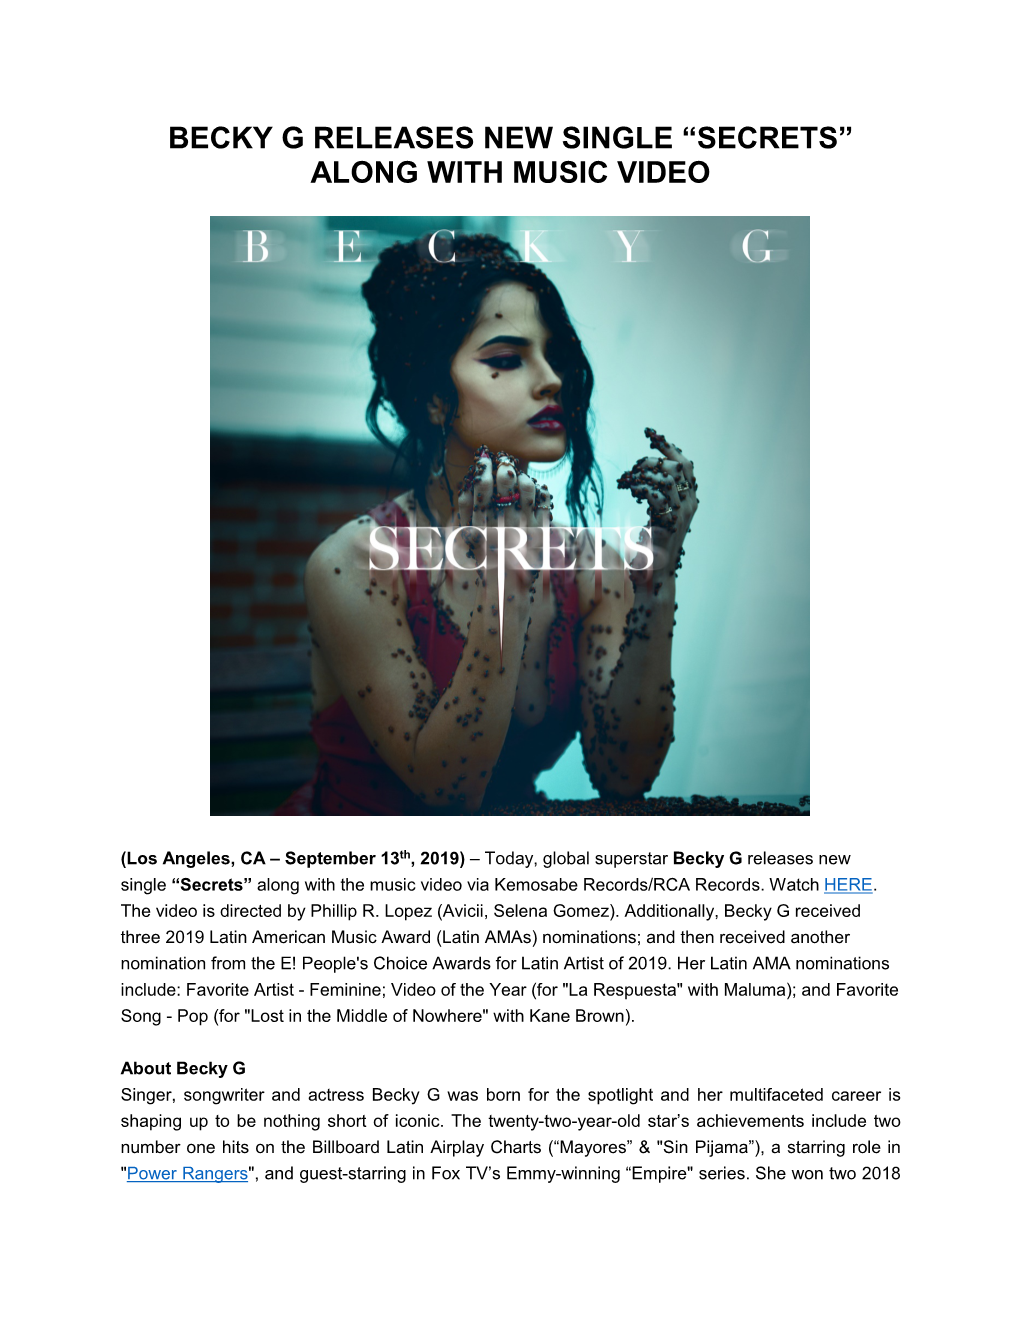 Becky G Releases New Single “Secrets” Along with Music Video